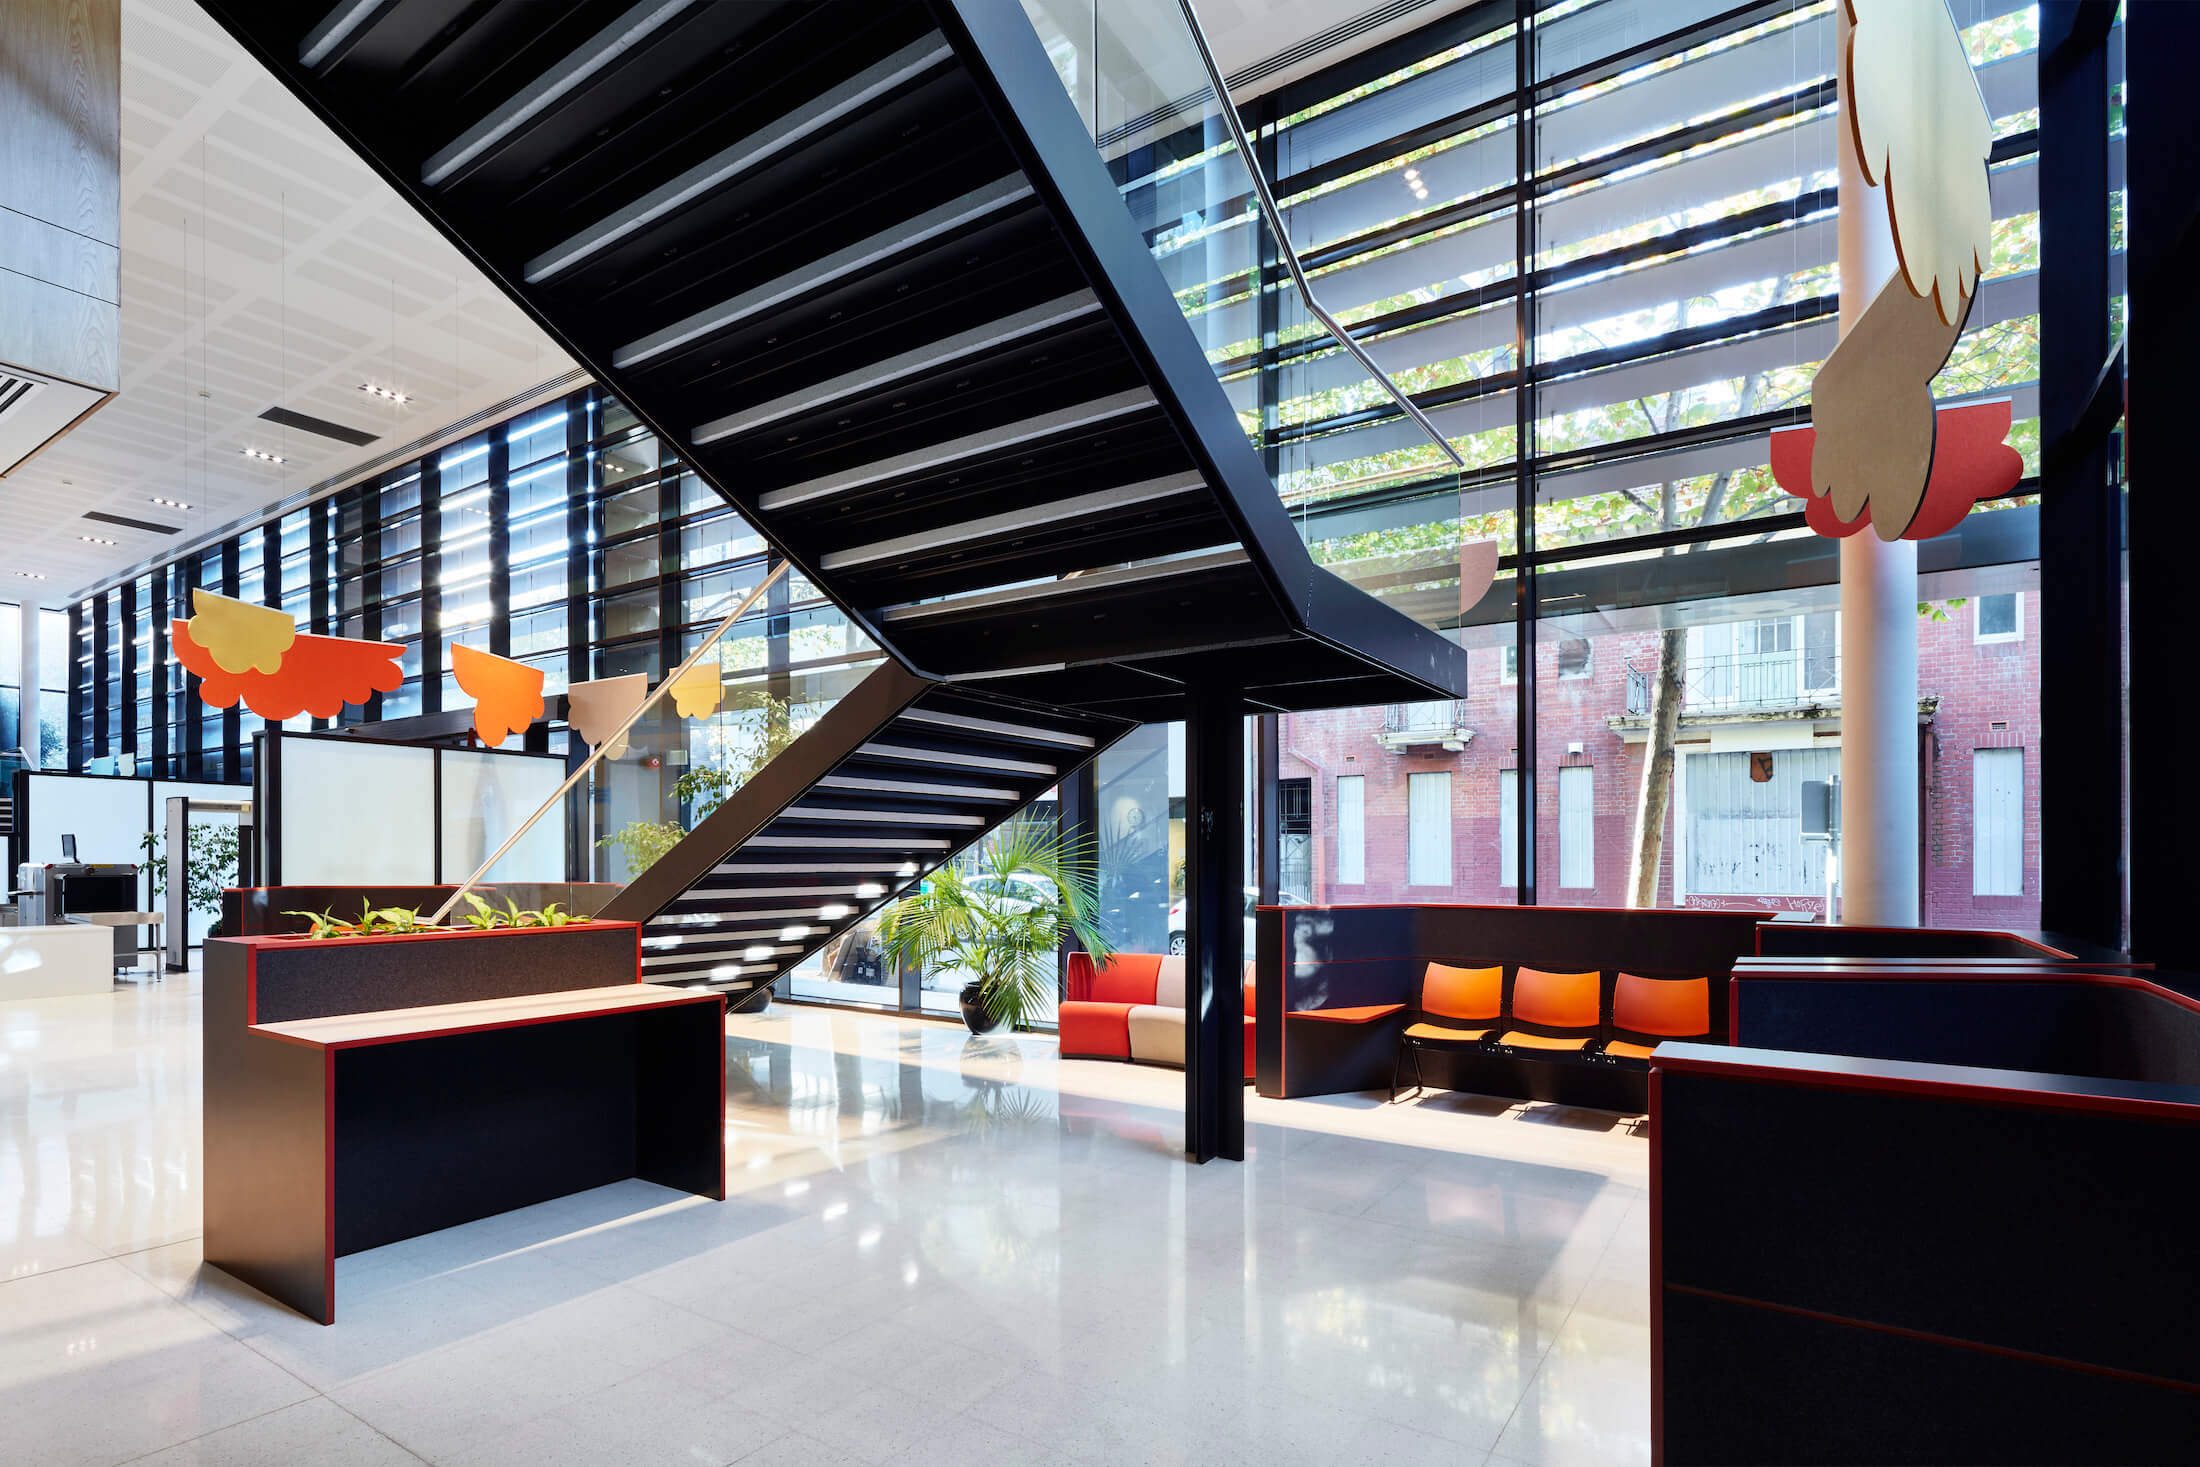 Foyer area with coloured seating and standing desks, external shading on building and colourful cloud acoustic panels